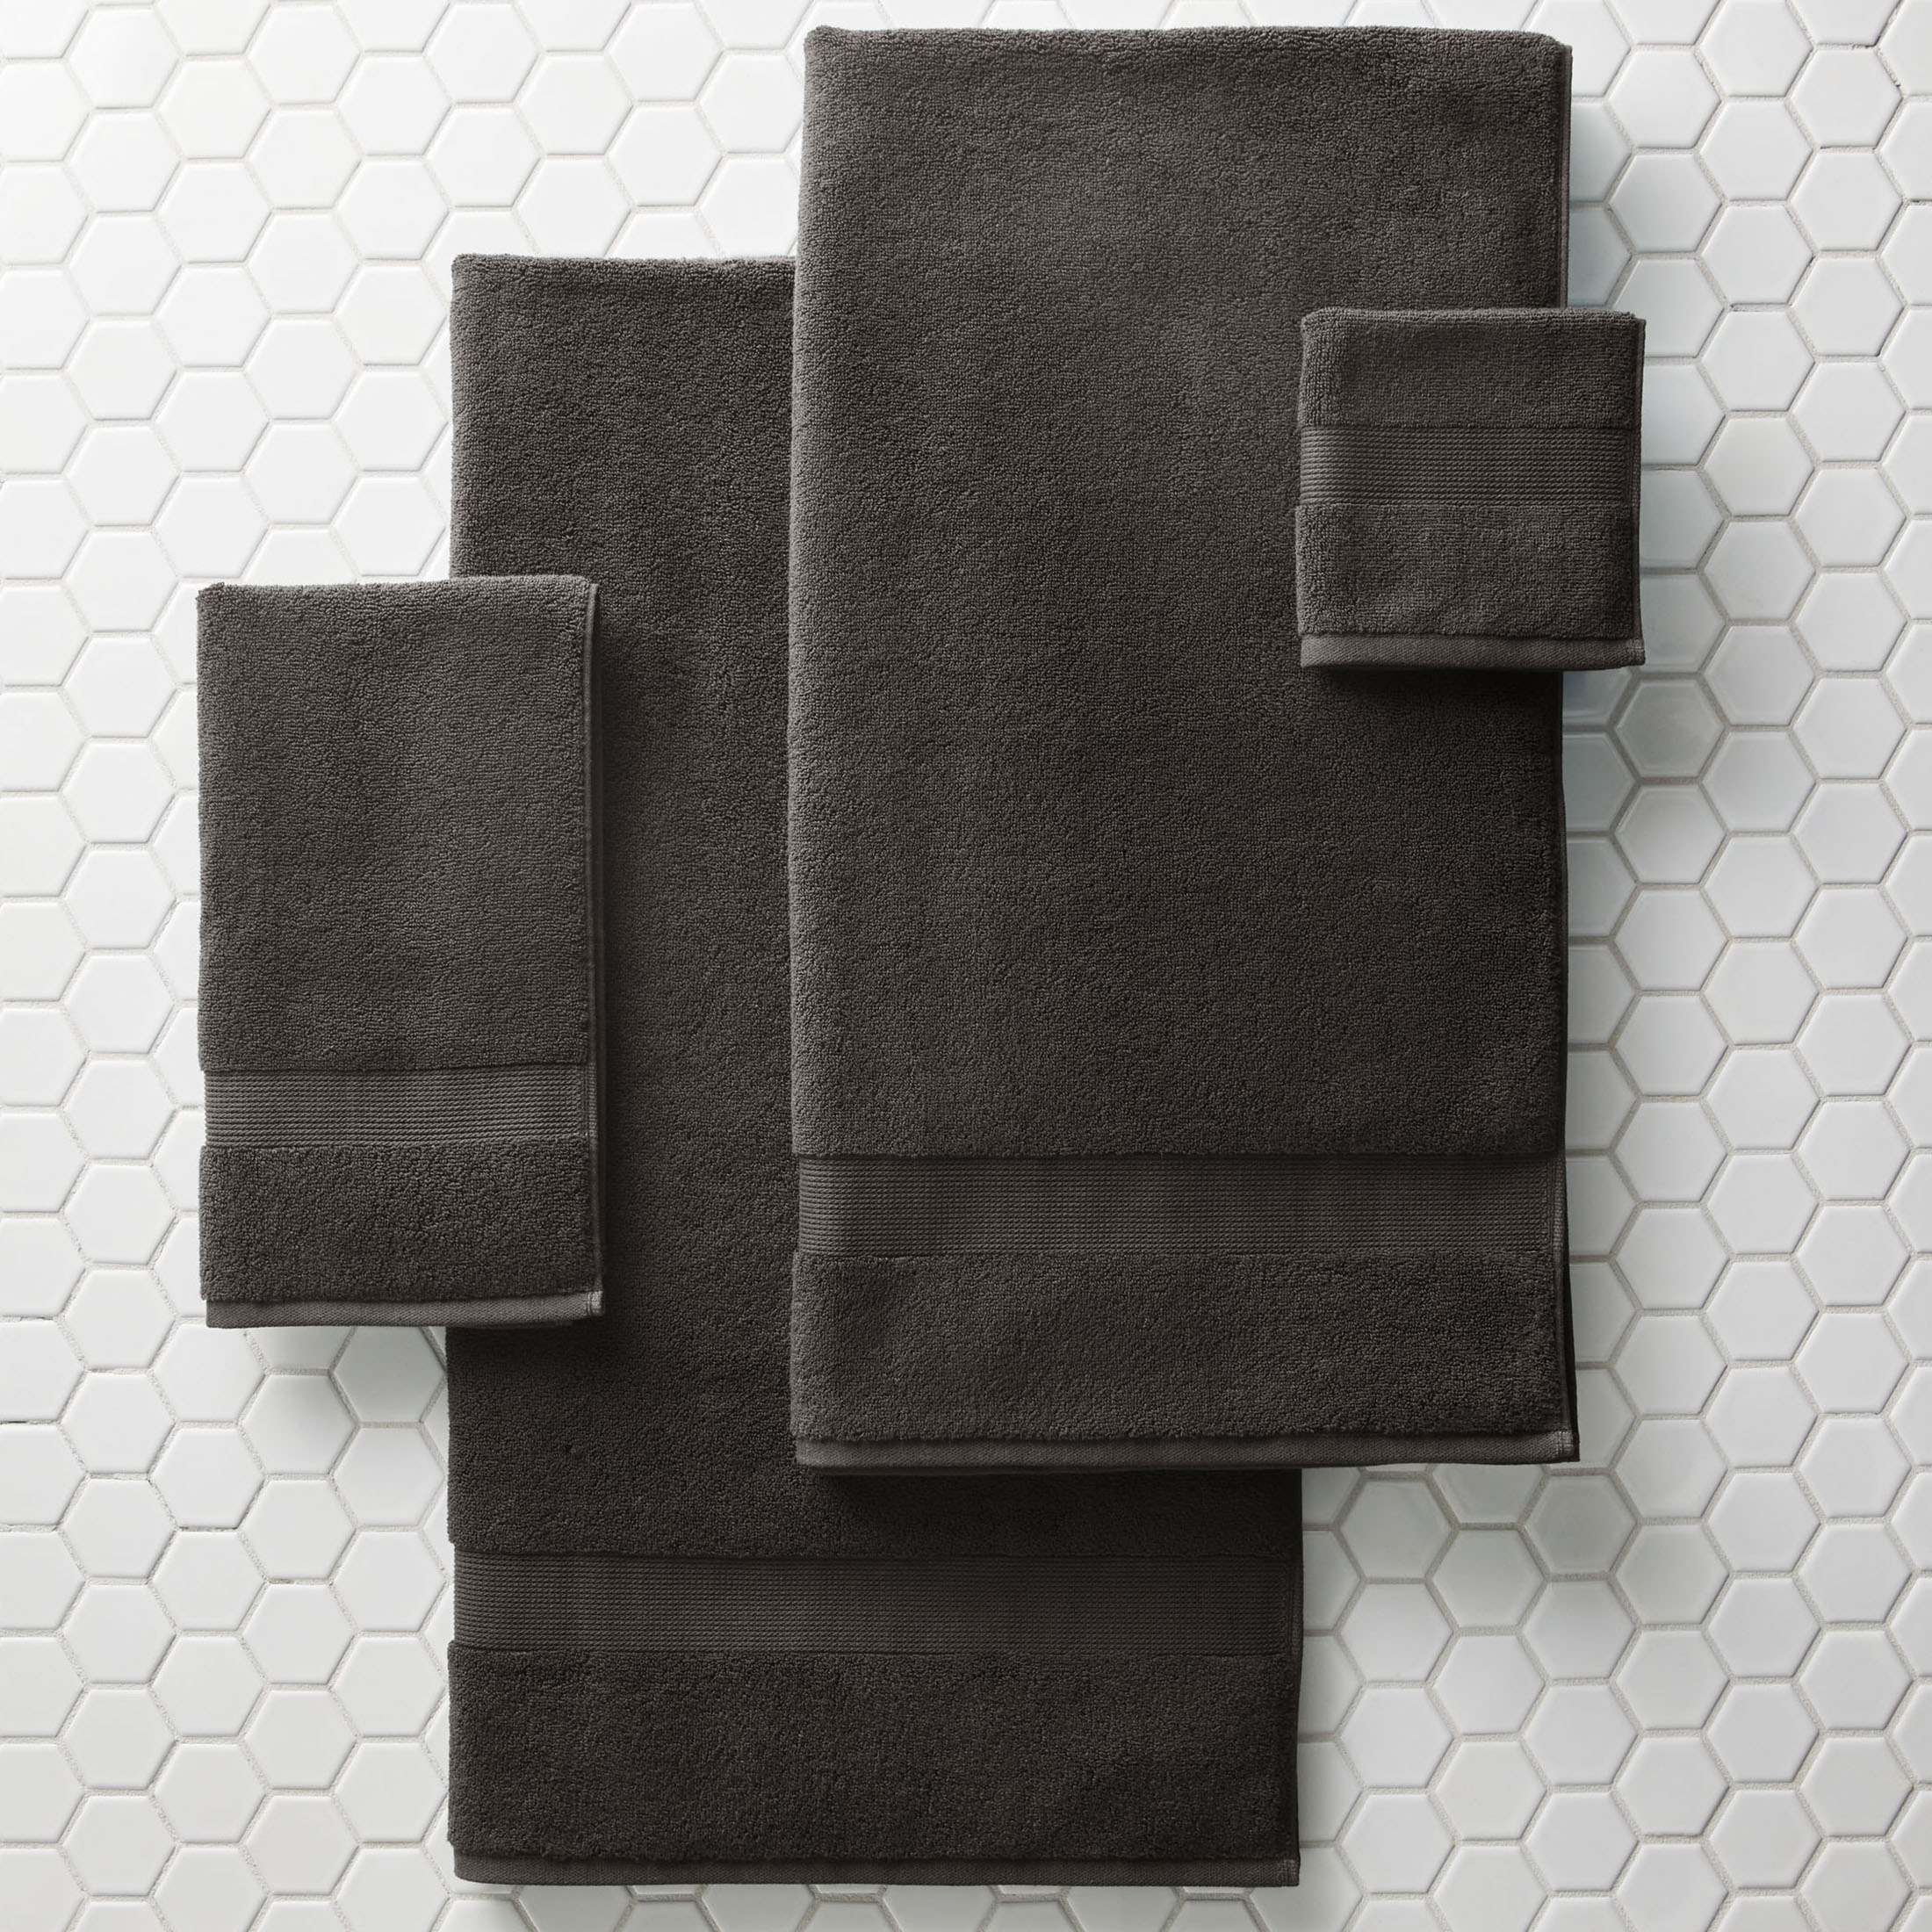 Better Homes & Gardens Signature Soft Hand Towel, Gray - image 4 of 6